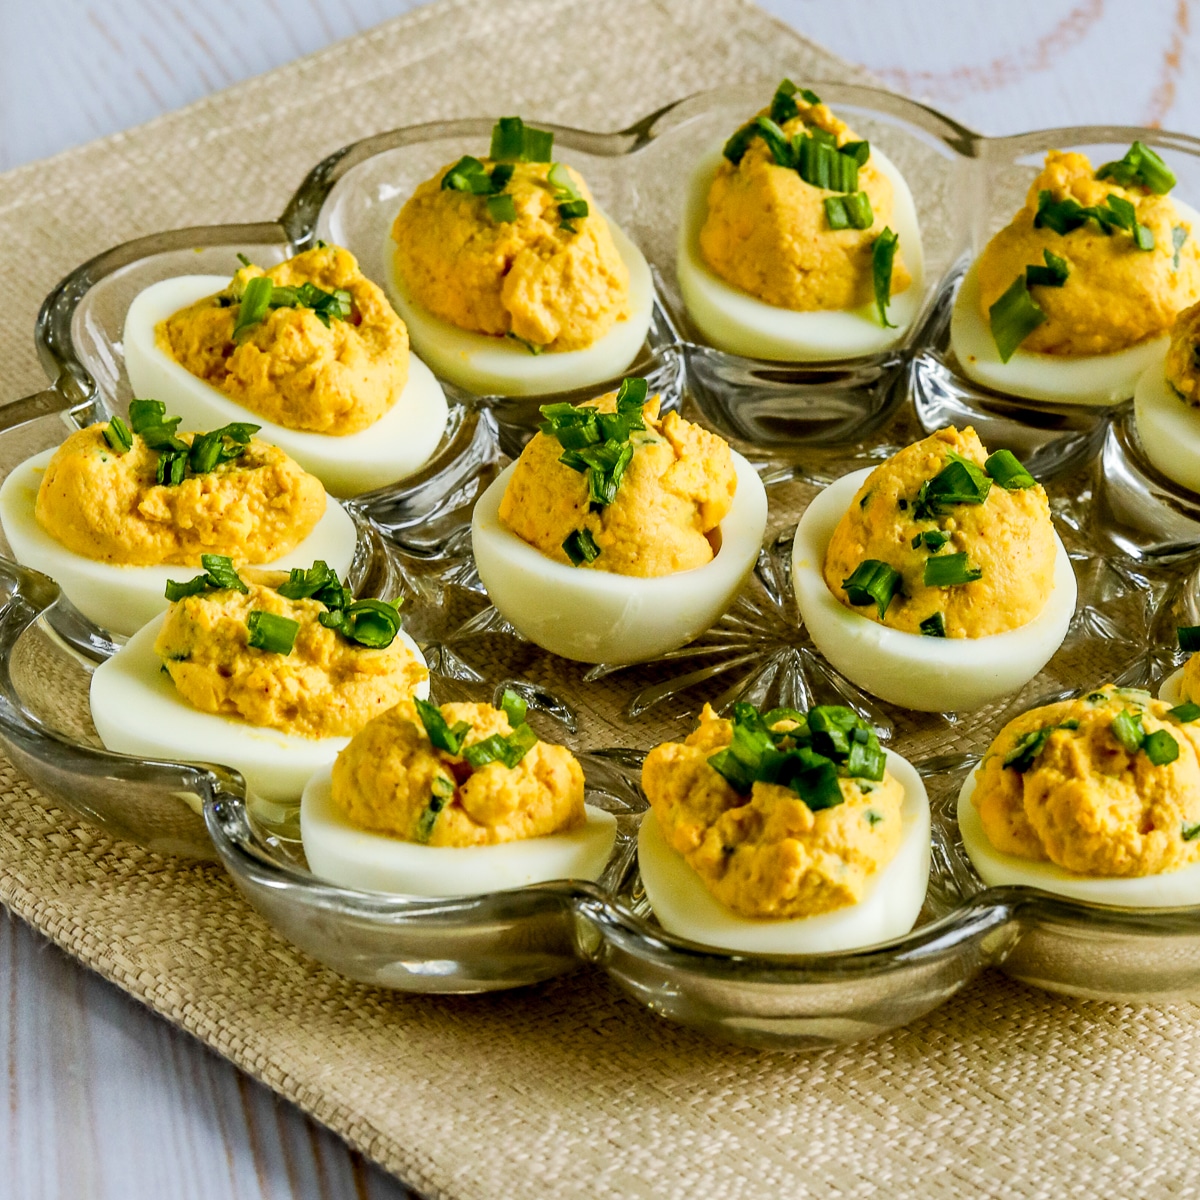 Spicy Deviled Eggs with finely chopped green onion garnish, shown in egg-serving dish.